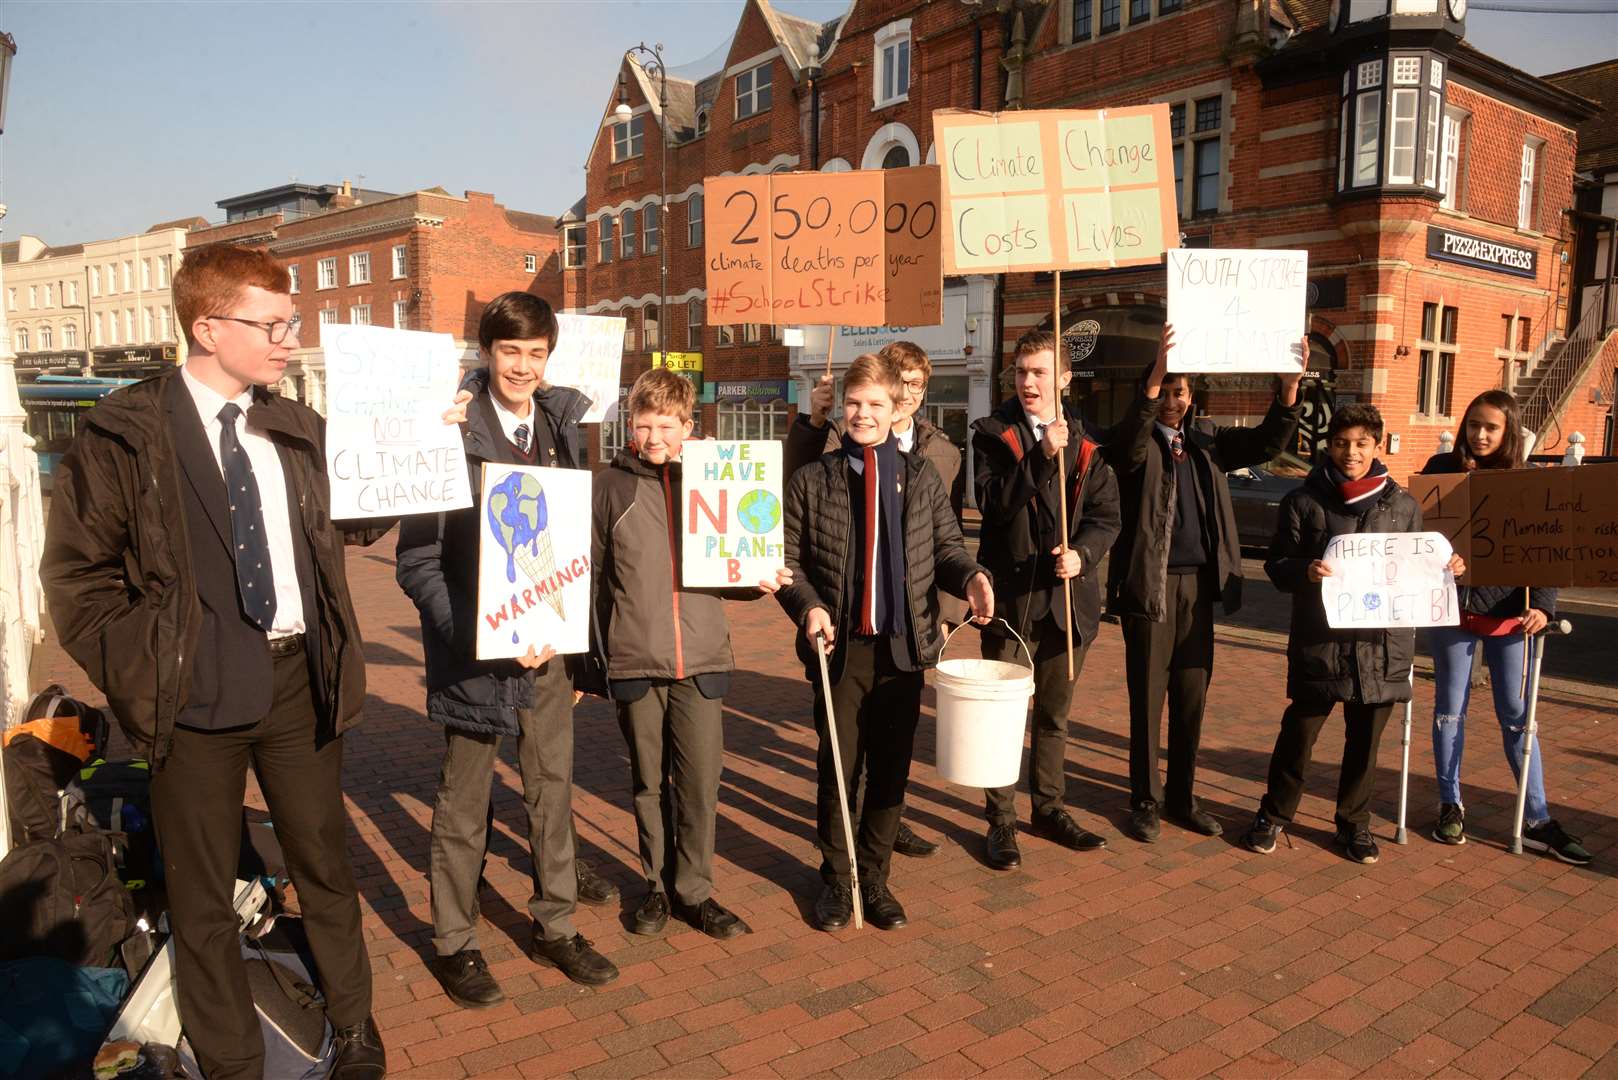 Students from the Judd School protesting about insufficient climate change action in Tonbridge on Friday. Picture: Chris Davey